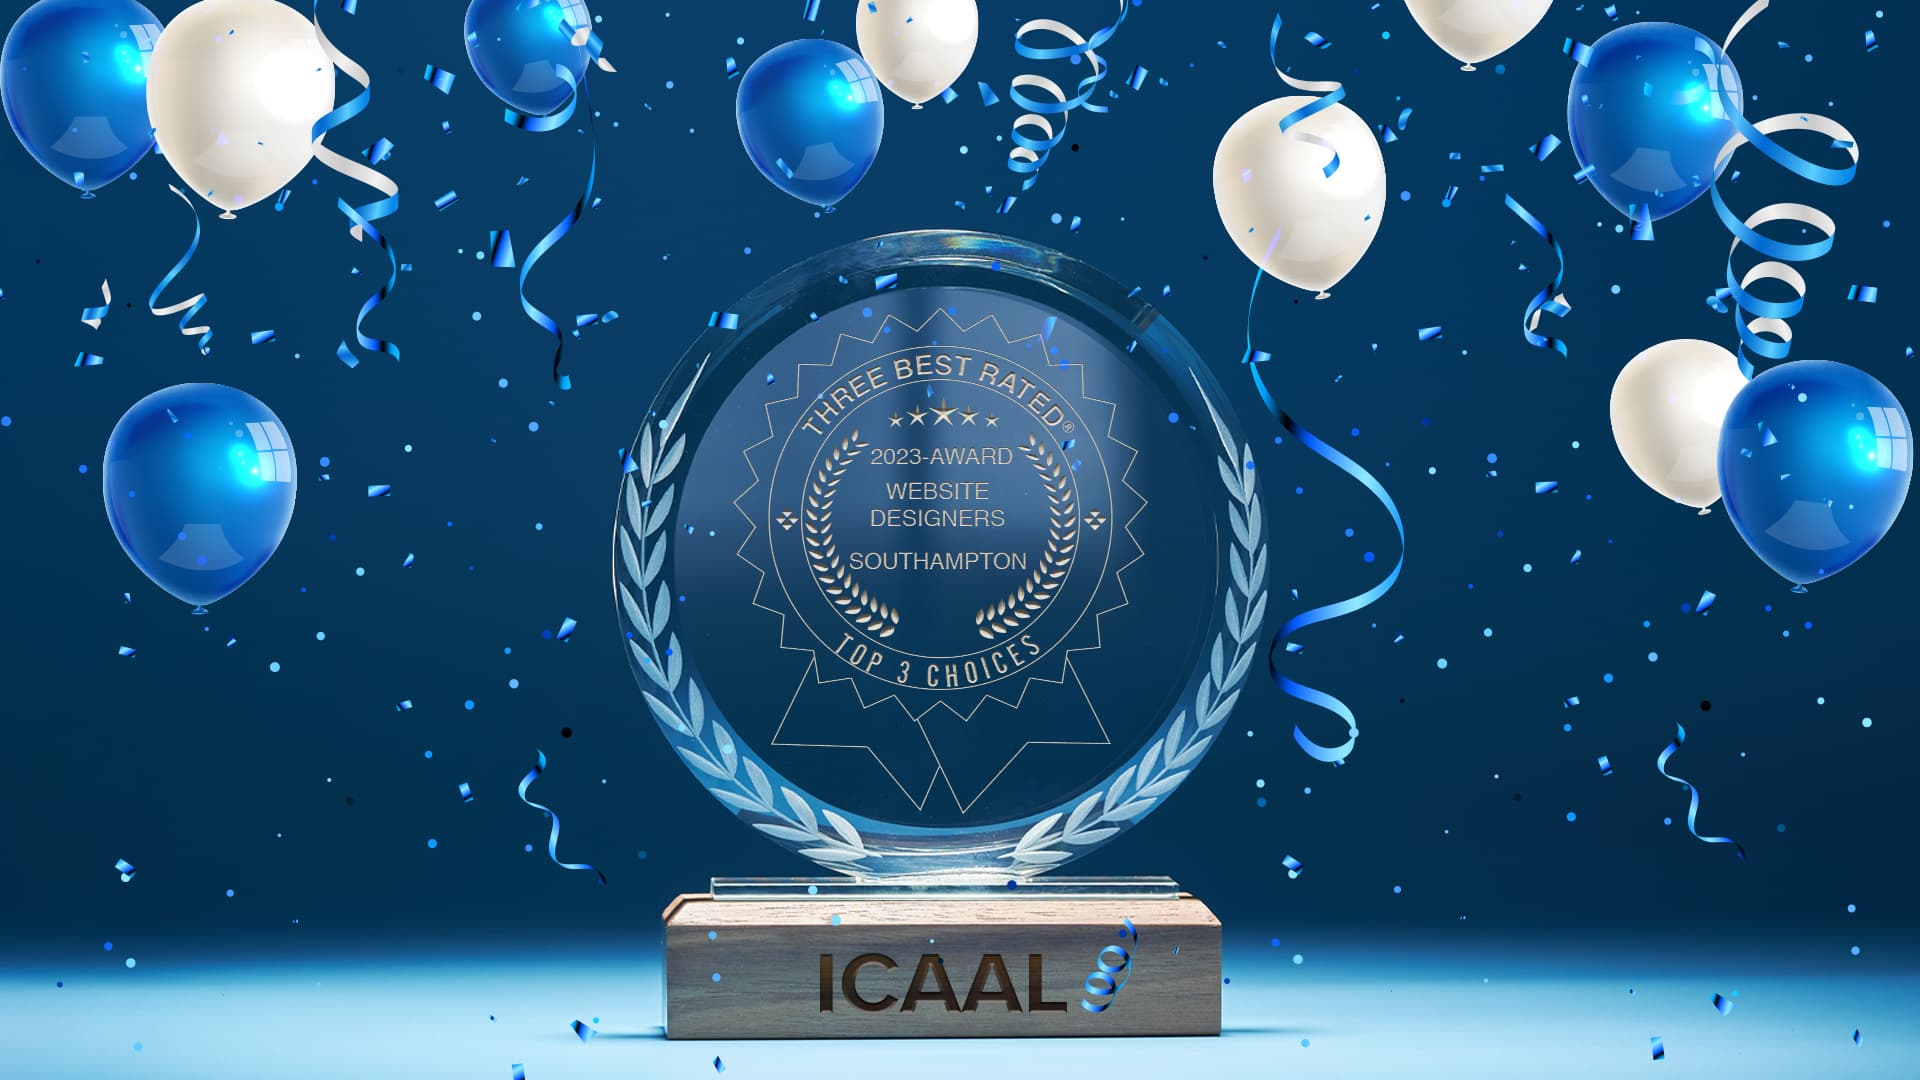 3 Best Rated ICAAL